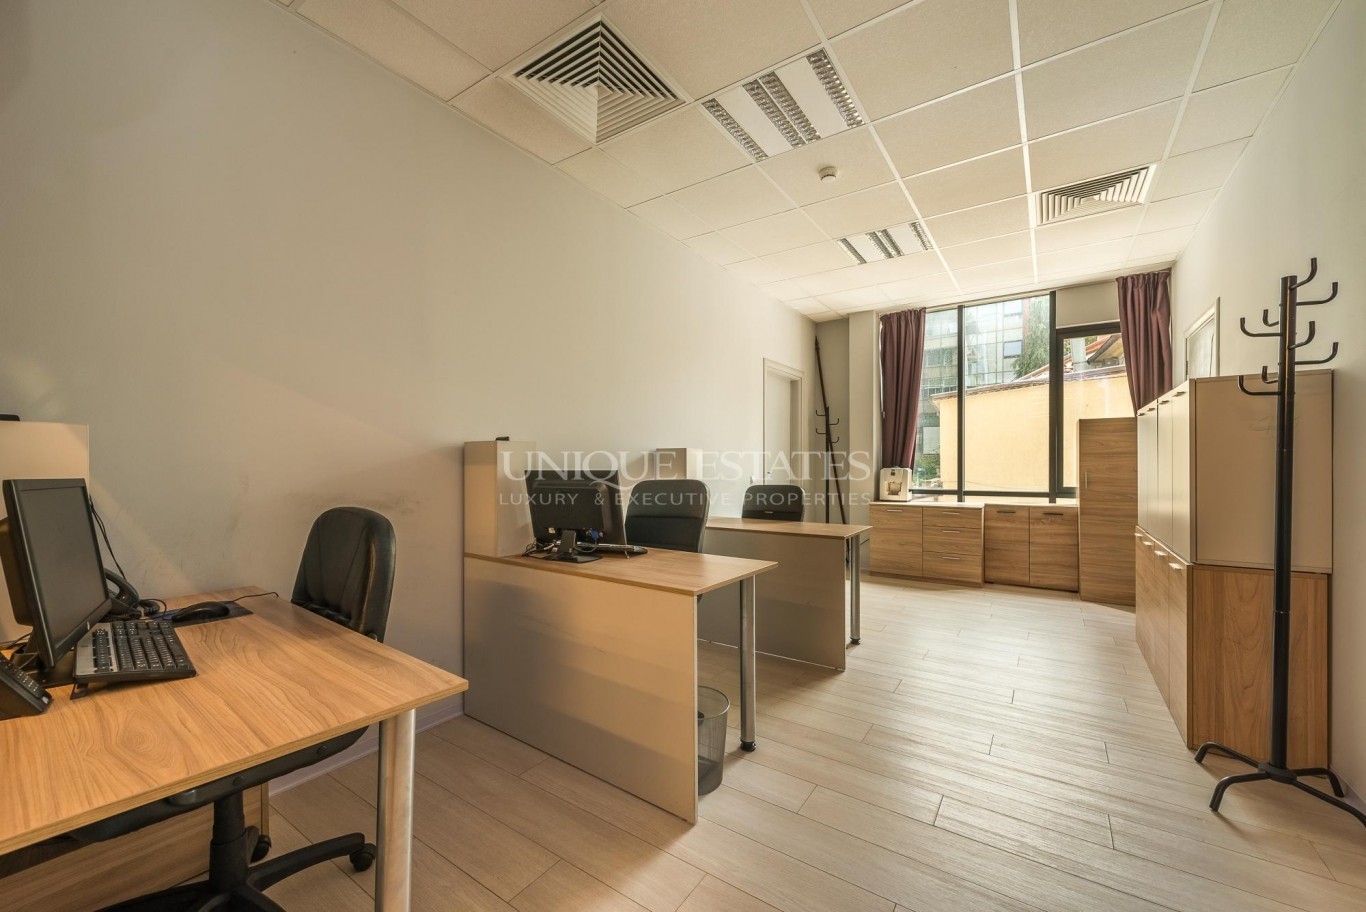 Office for sale in Sofia, Lozenets with listing ID: K8735 - image 4